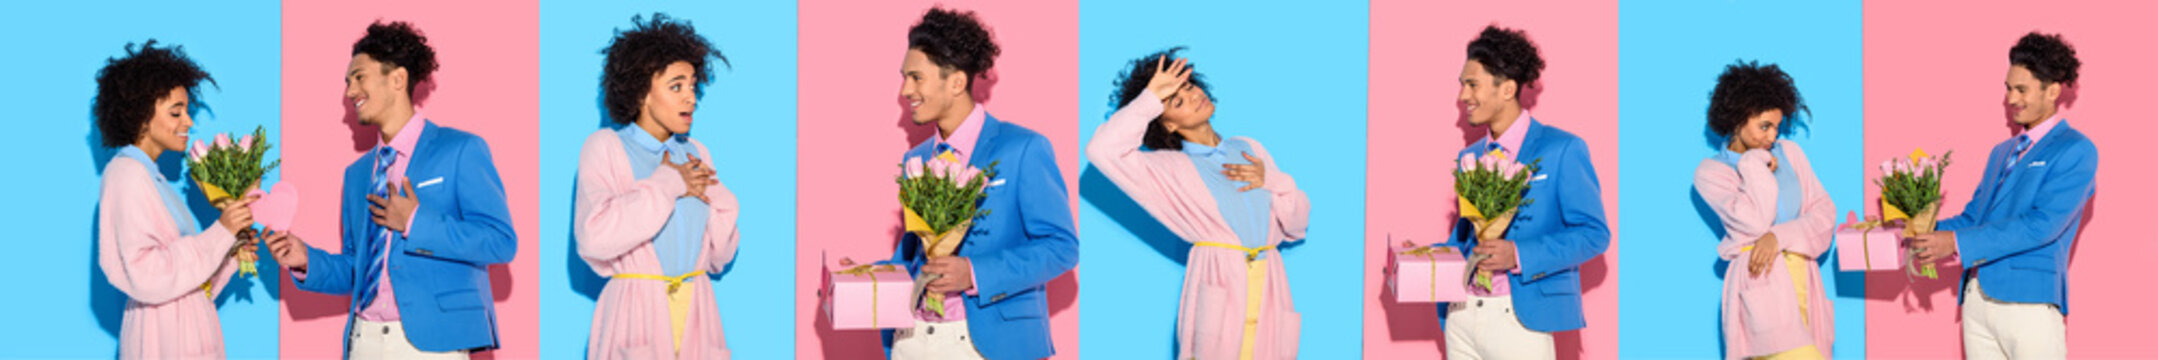 Collage Of Young African American Man Giving Gift And Flowers To African American Woman On Blue And Pink Background